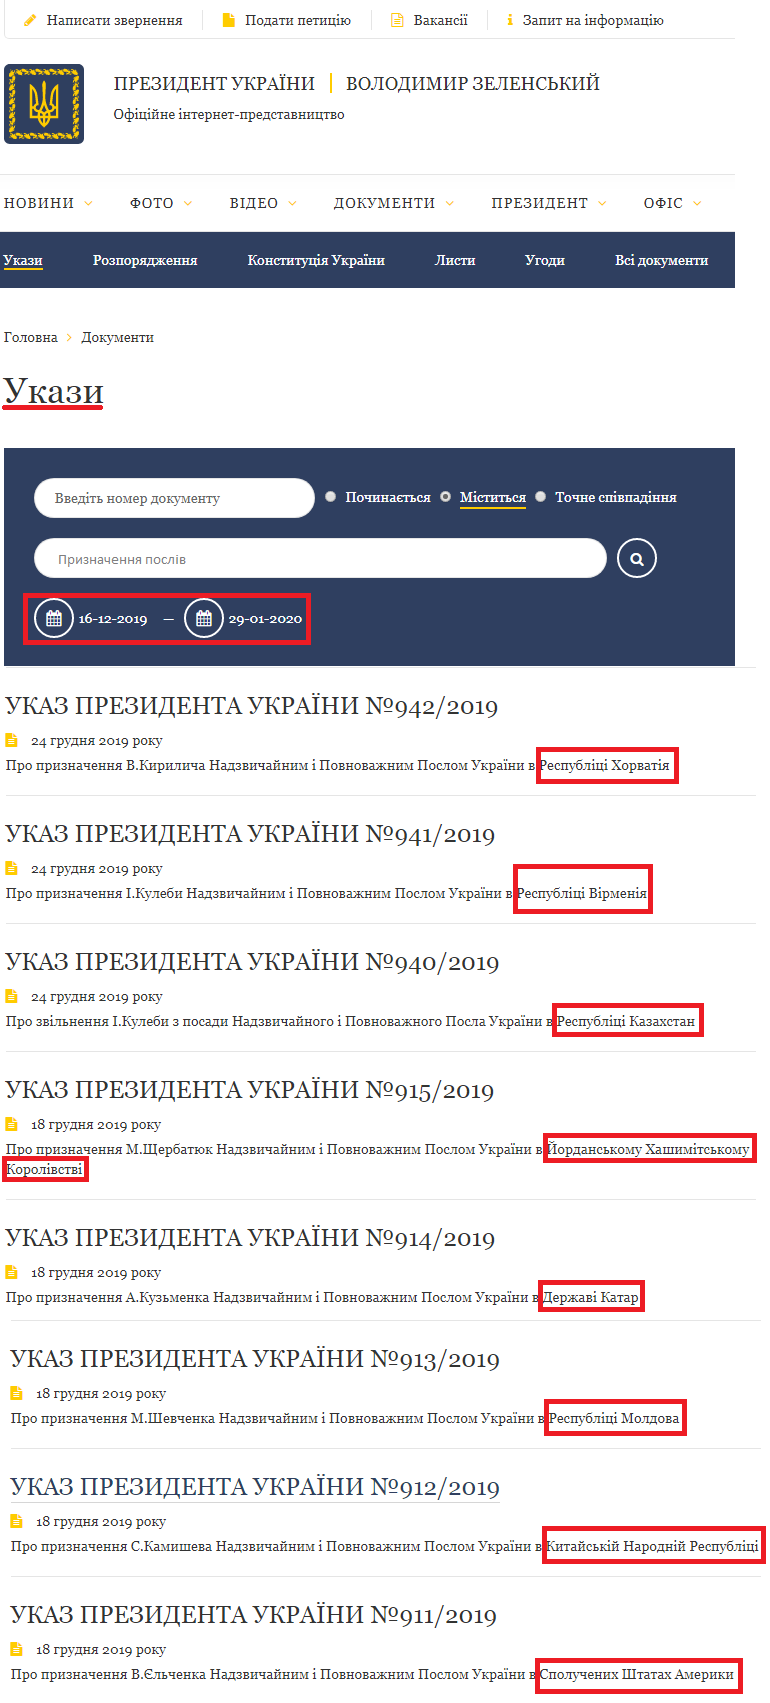 https://www.president.gov.ua/documents/decrees?s-num=&contain-rule=contains&s-text=%D0%BF%D0%BE%D1%81%D0%BB&date-from=16-12-2019&date-to=29-01-2020&order=desc&